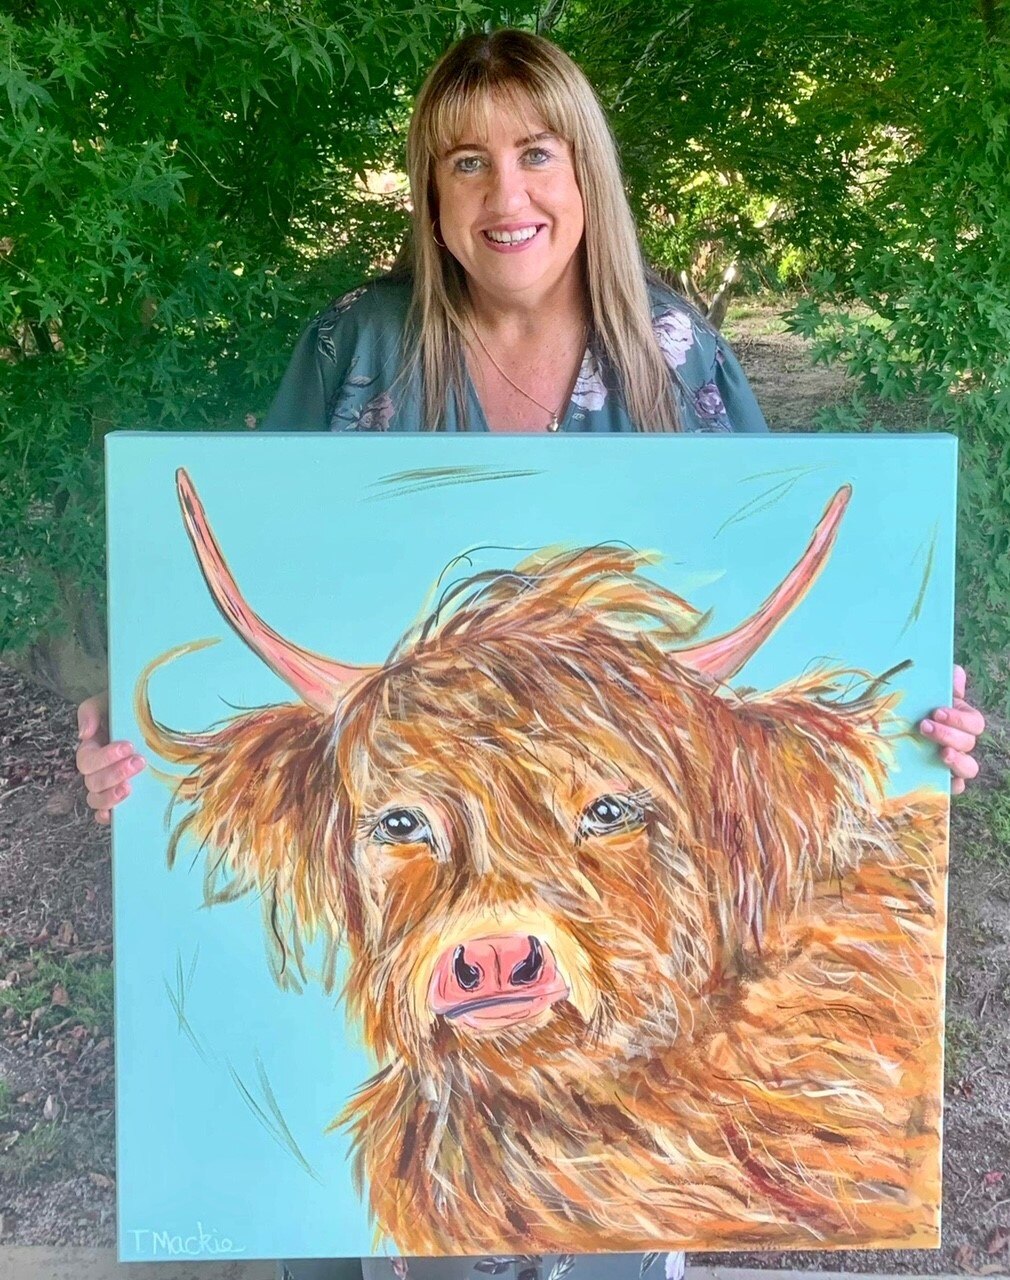 Picture of Tracey Mackie holding painting of Cow titled Catriona